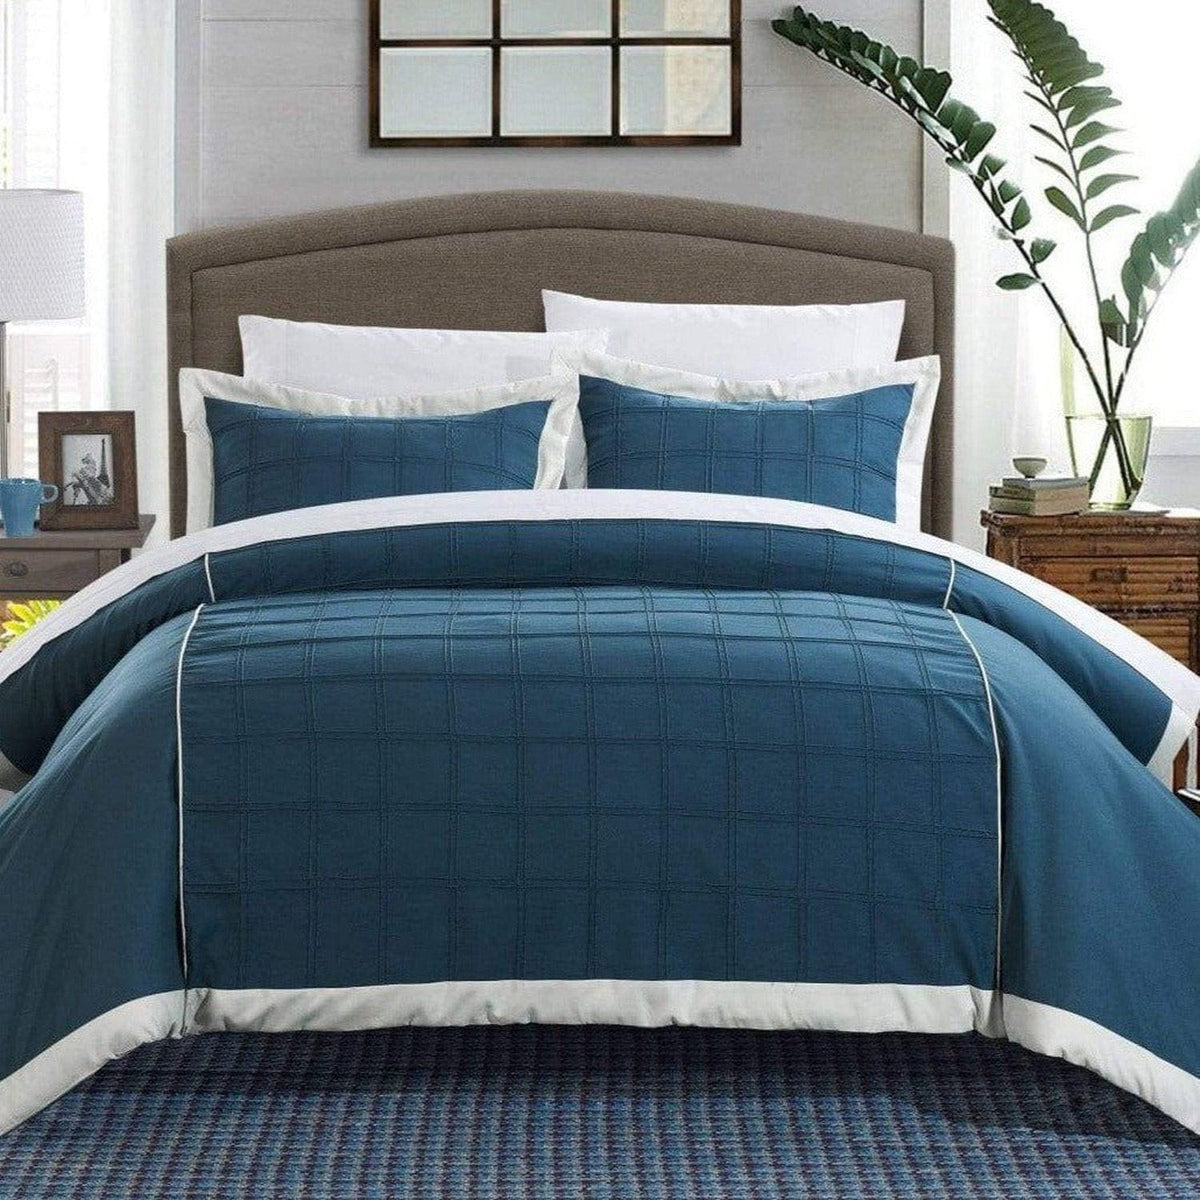 Chic Home Angelina 7 Piece Patchwork Duvet Cover Set Teal